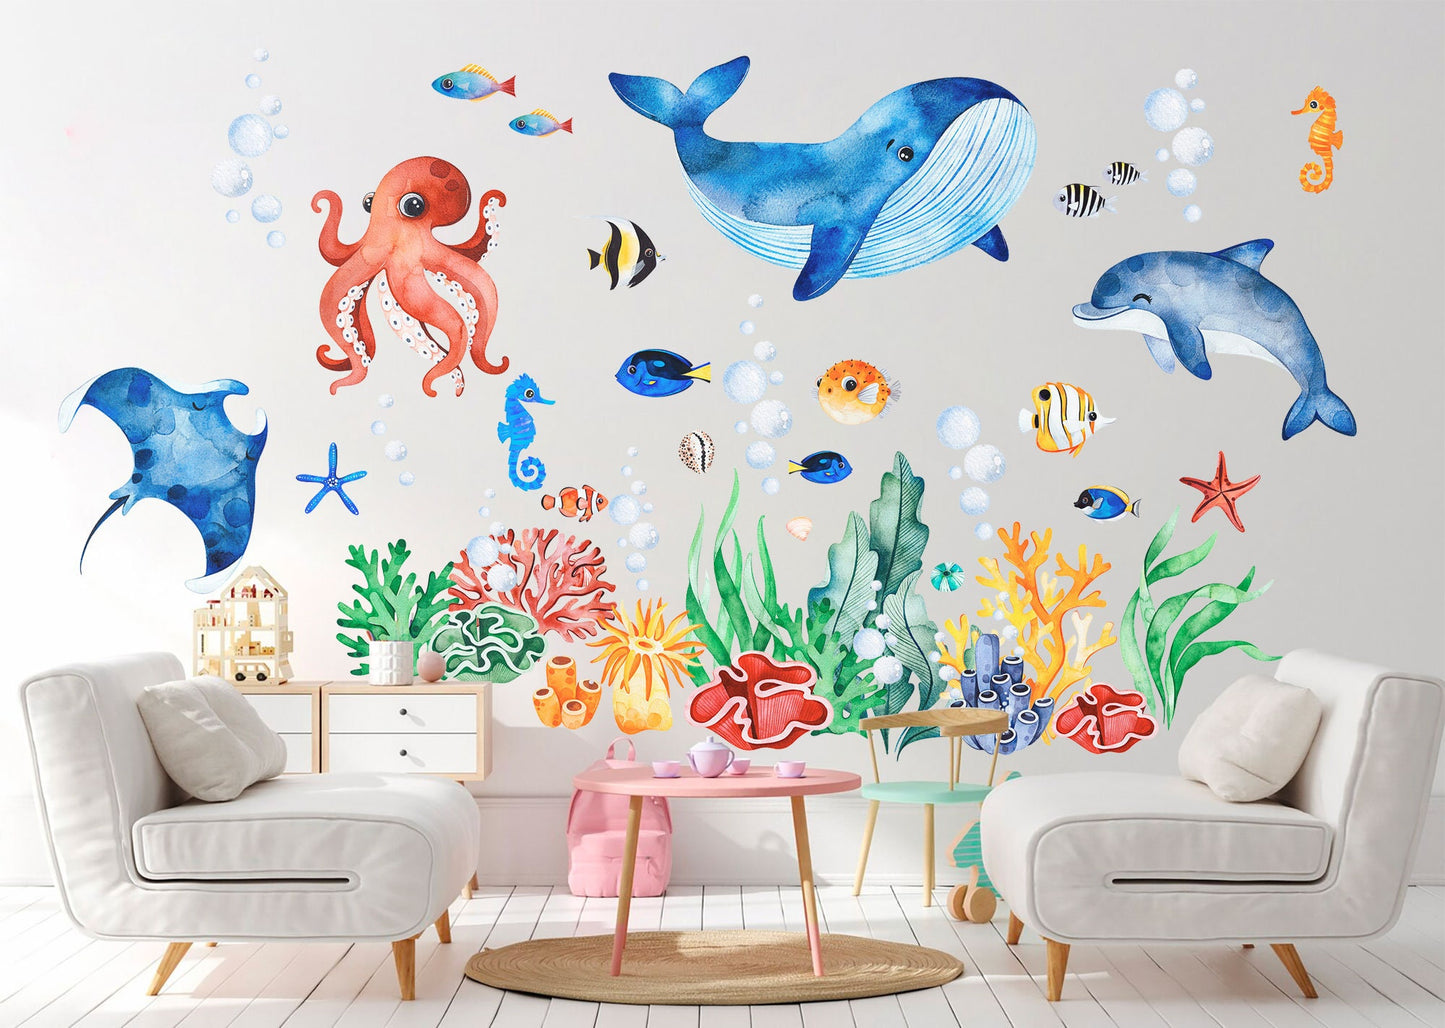 Ocean Baby Buddies Wall Decal - Whales, Dolphins, Octopuses, and More Playing Together - BR336